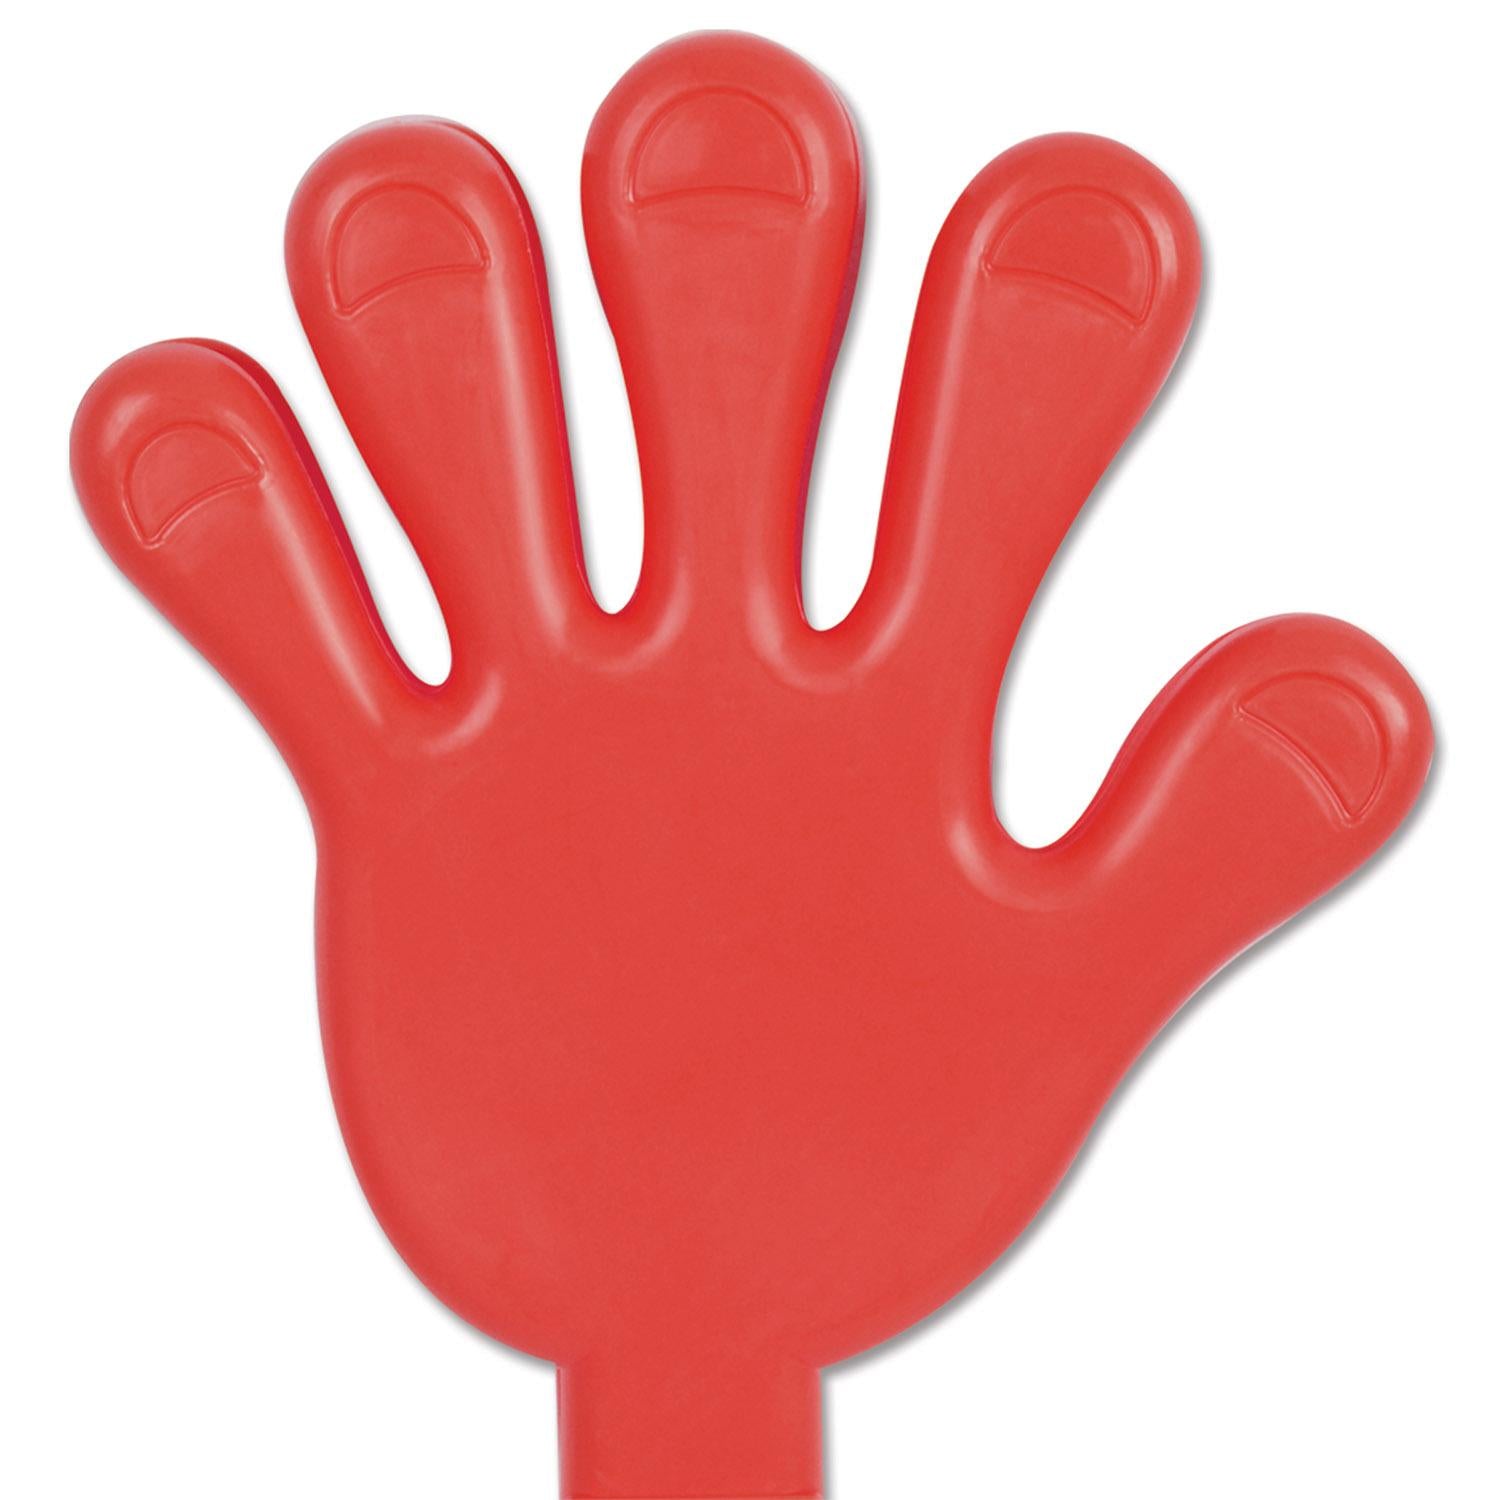 Beistle Giant Hand Party Clapper - red